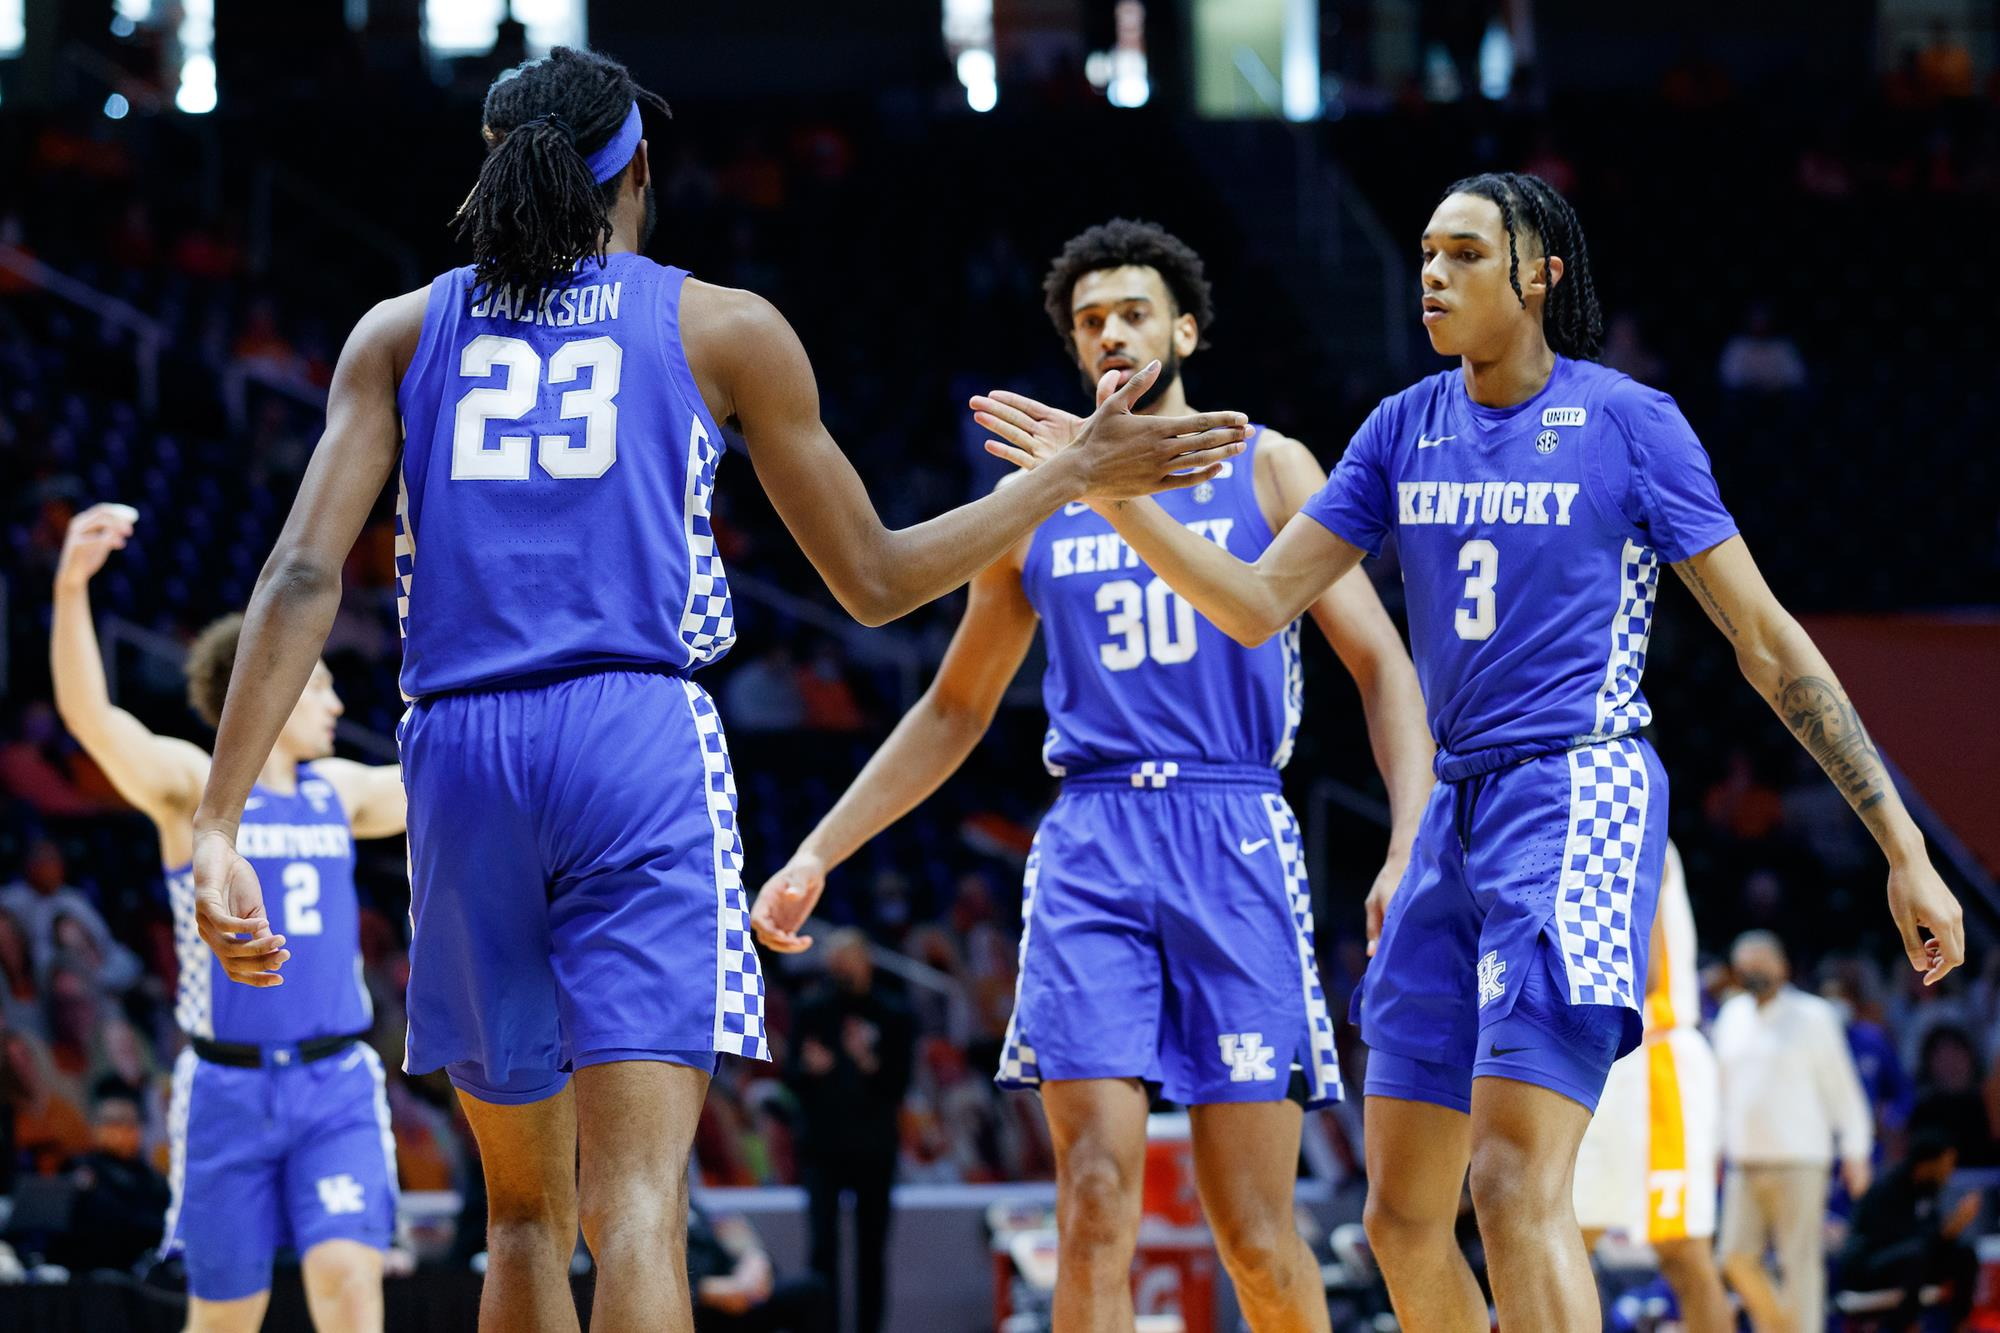 13 UK MBB Players to Participate in NBA Las Vegas Summer League